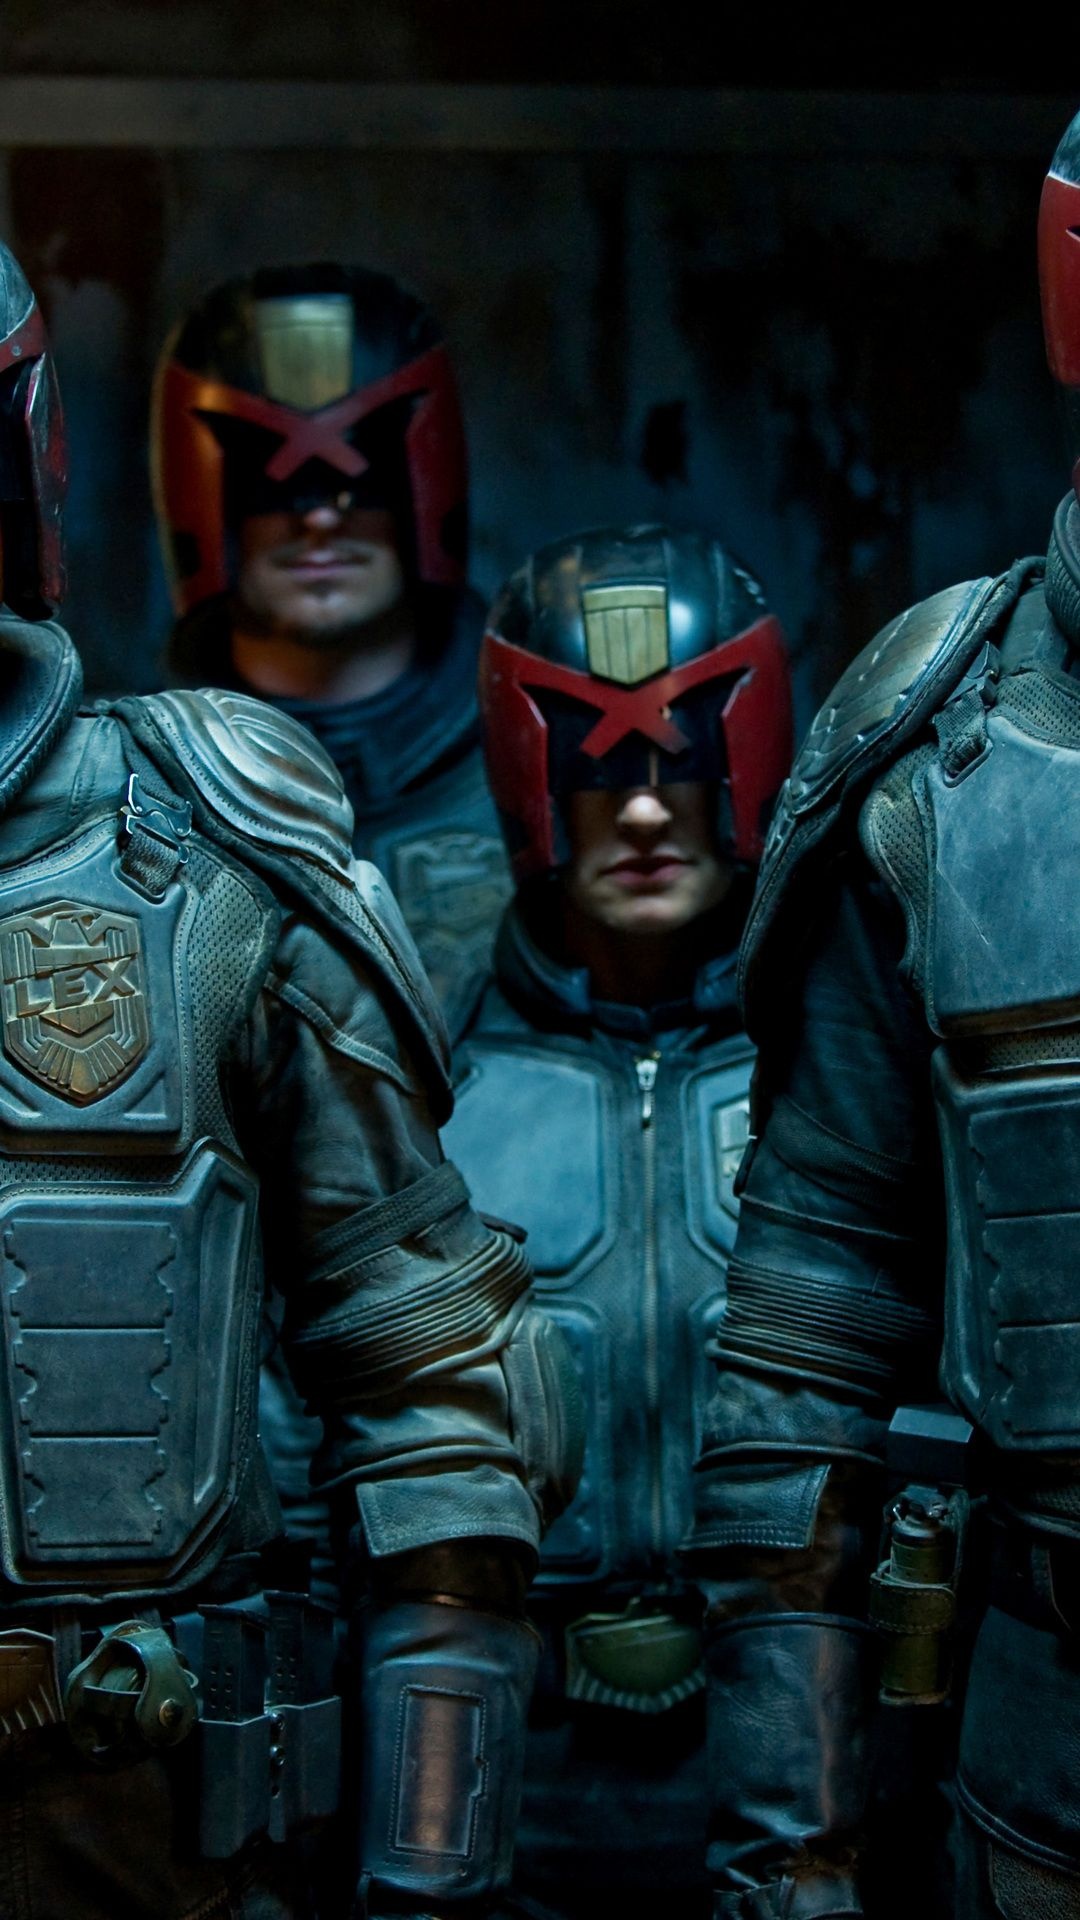 Dredd: Cloned from the DNA of Chief Judge Fargo, the first chief judge of Mega-City One. 1080x1920 Full HD Wallpaper.